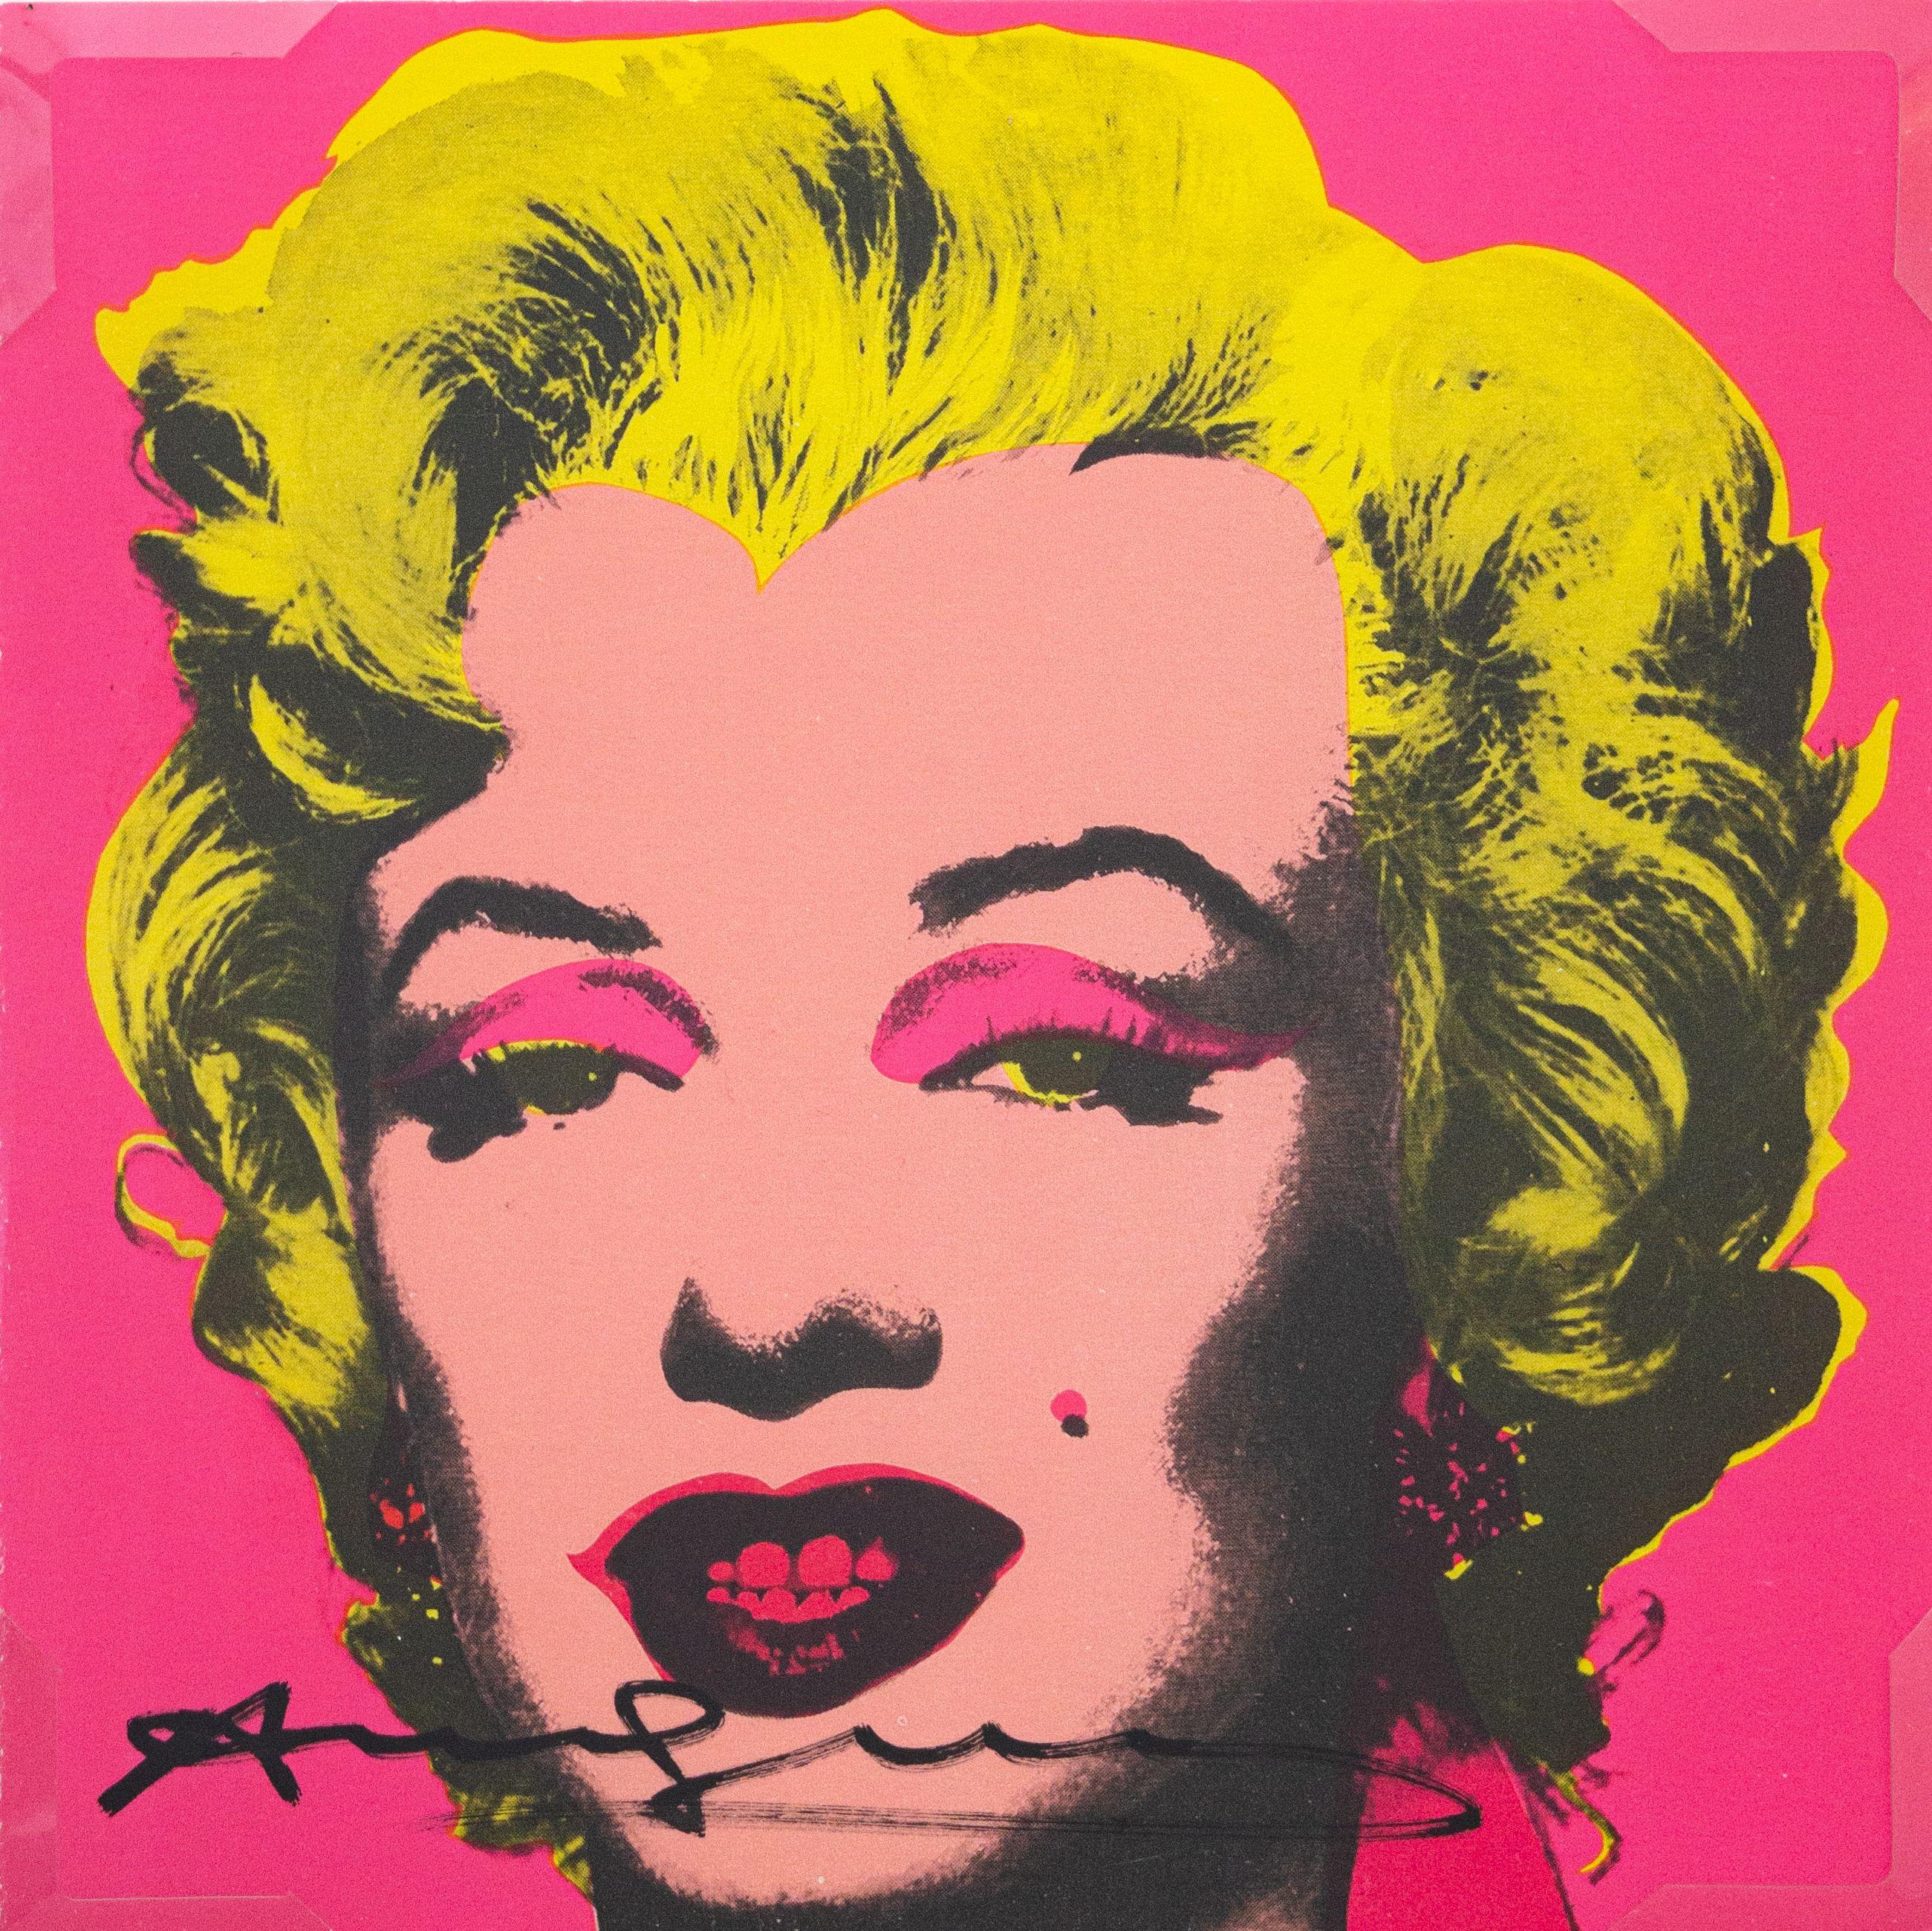 ANDY WARHOL (1928-1987)

Andy Warhol's 'Marilyn (Invitation)' is an offset lithograph in vivid color. The sheet is signed and inscribed '101' on the verso. This piece is in excellent condition and framed beautifully. 

(Not in F. & S.)